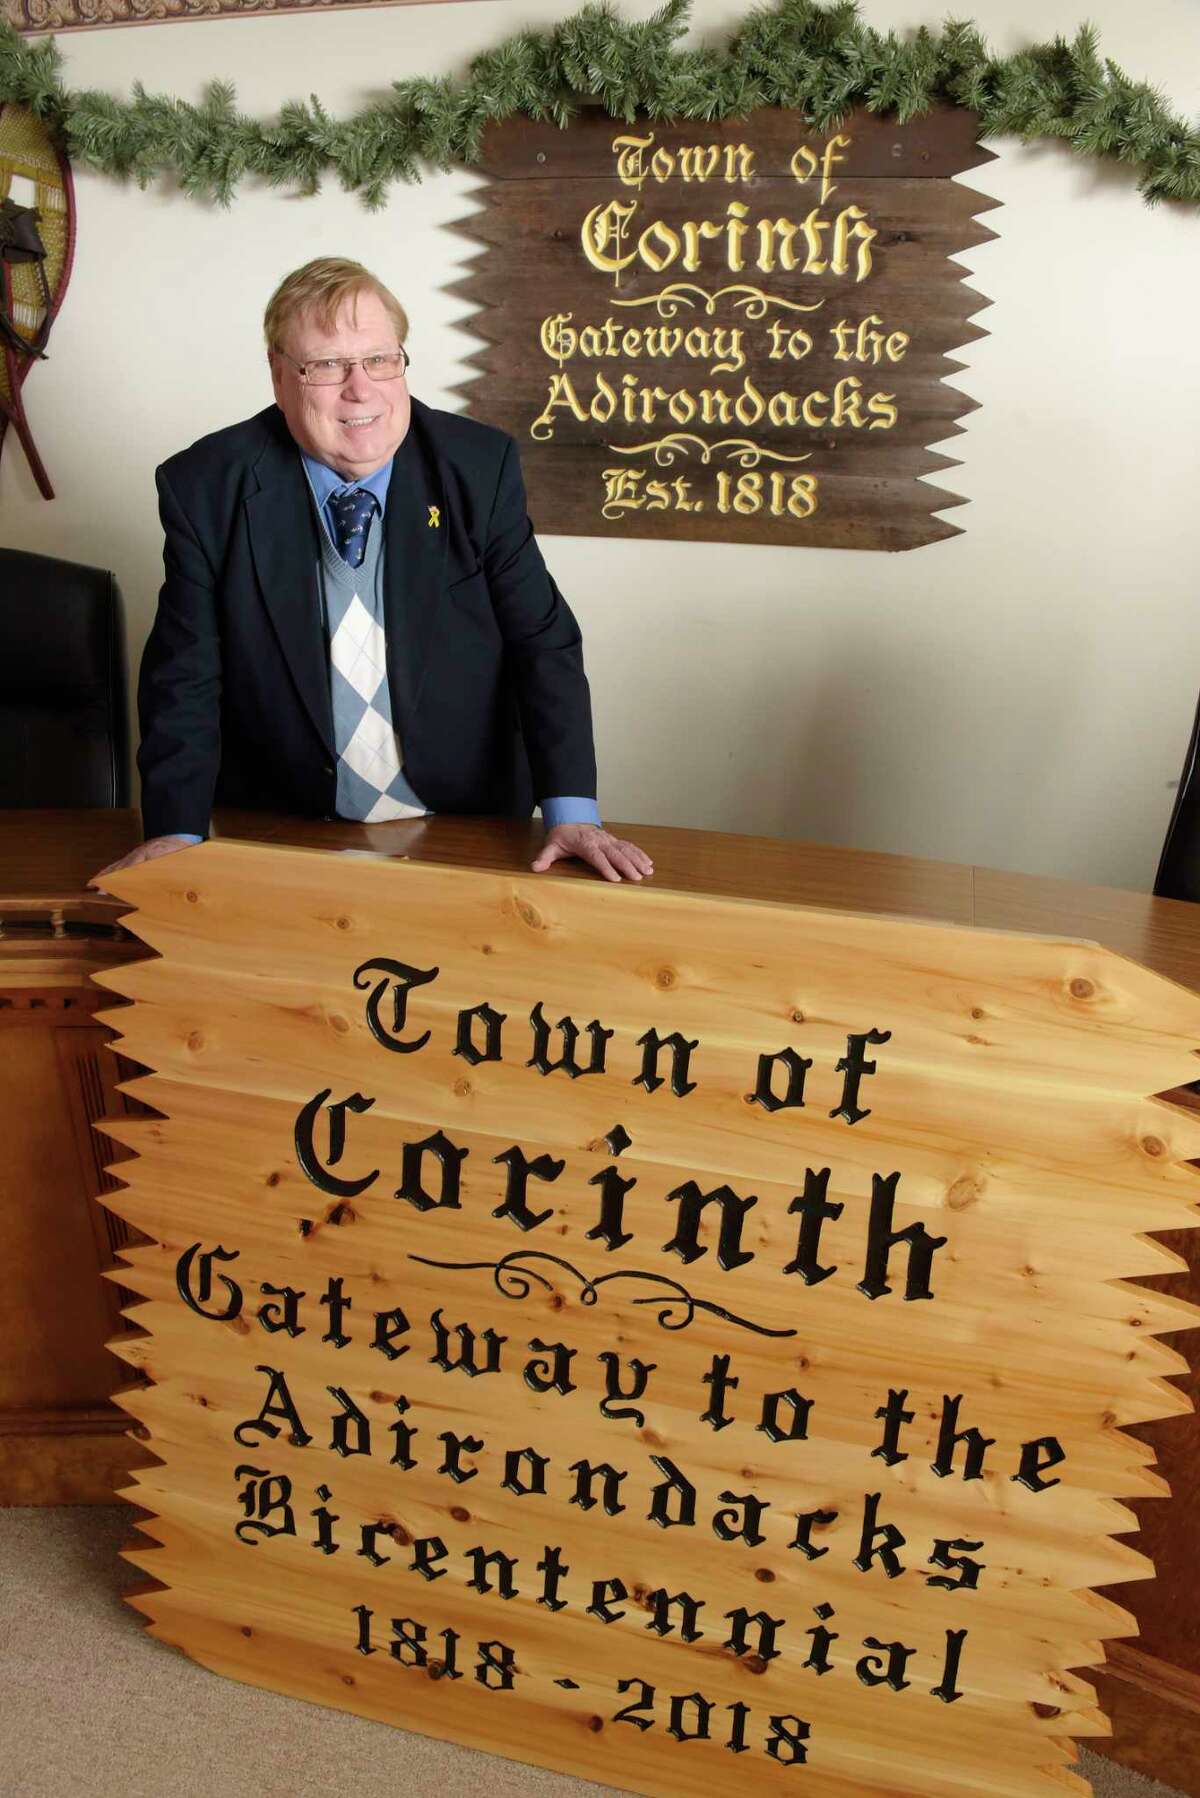 Corinth Town Supervisor Dick Lucia poses with one of the new town signs at Corinth Town Hall on Thursday, March 15, 2018, in Corinth, N.Y. On the wall in the background is the last remaining older town sign. The old sign is over 30 years old, Lucia said. The new signs will be places at the four entrances to the town sometime in the spring. (Paul Buckowski/Times Union)